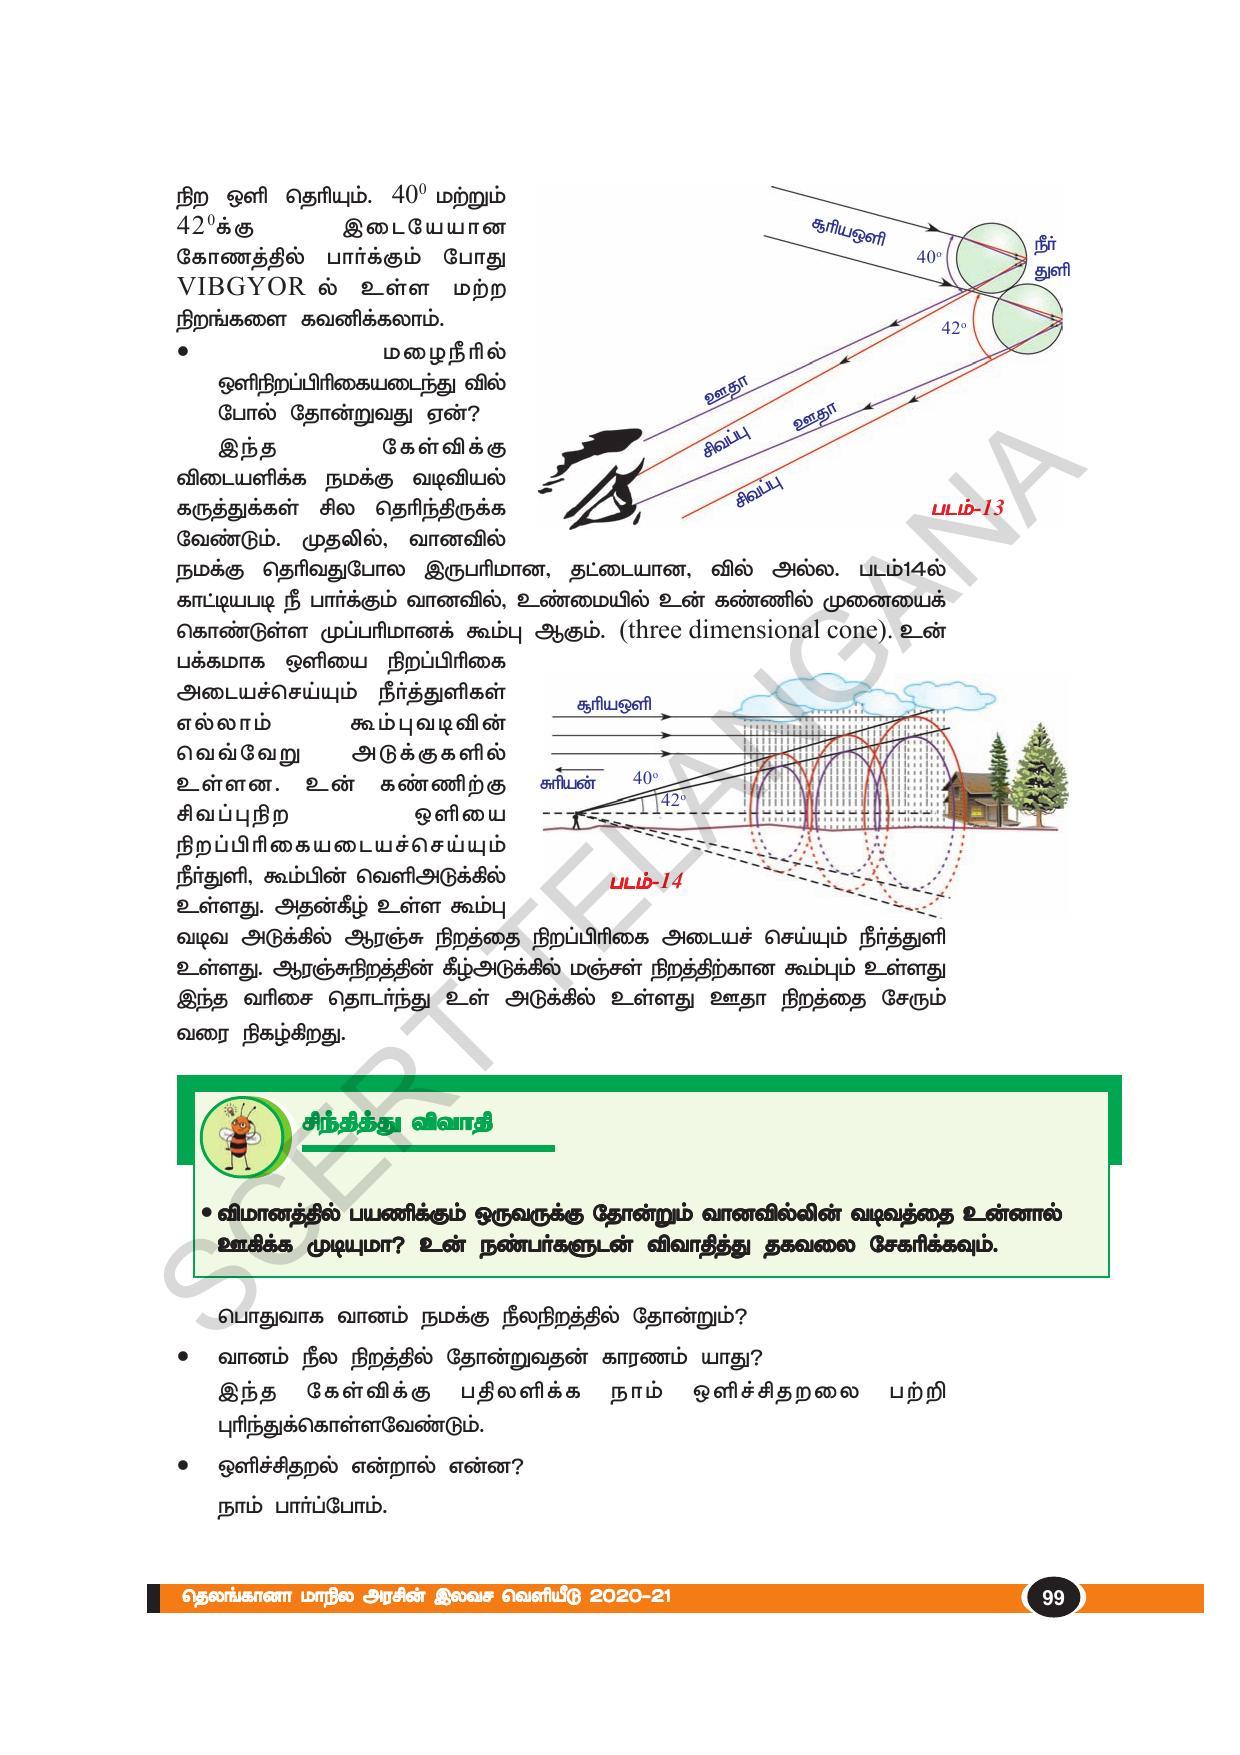 TS SCERT Class 10 Physical Science(Tamil Medium) Text Book - Page 111